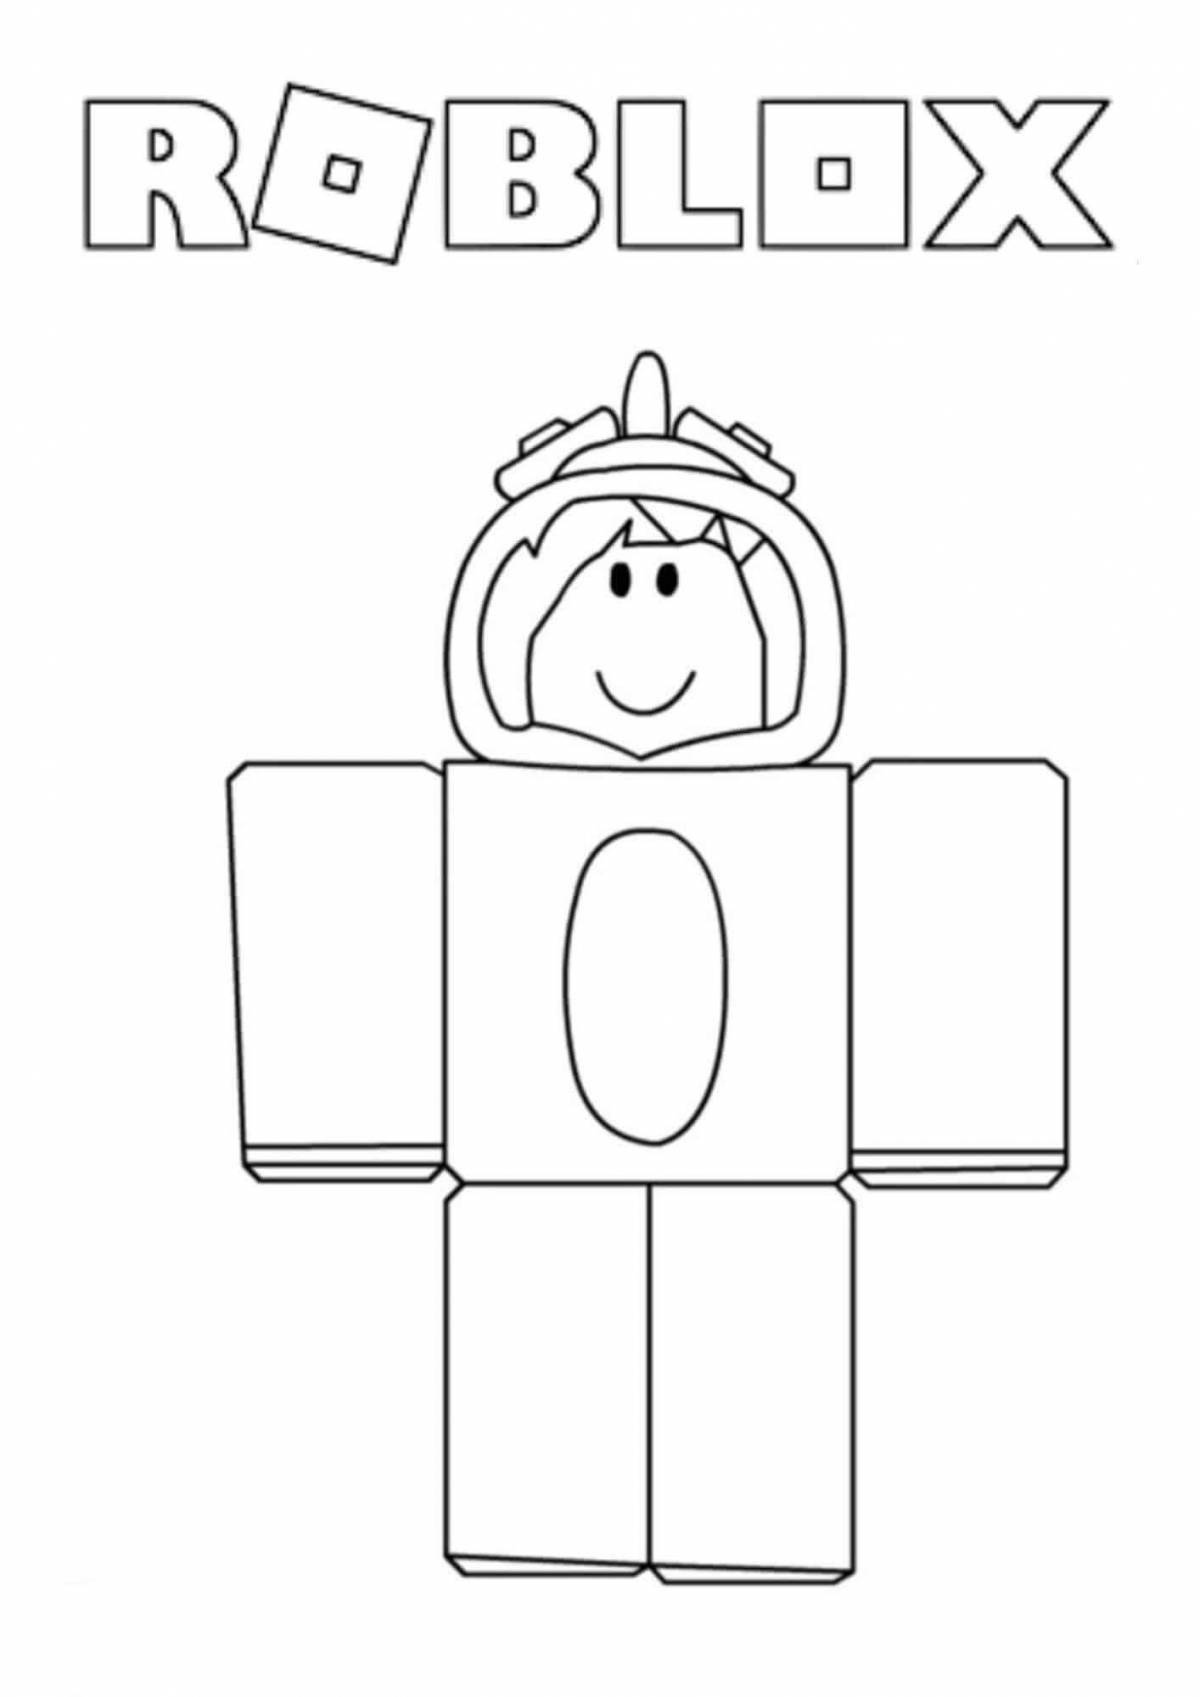 Roblox funny characters coloring book